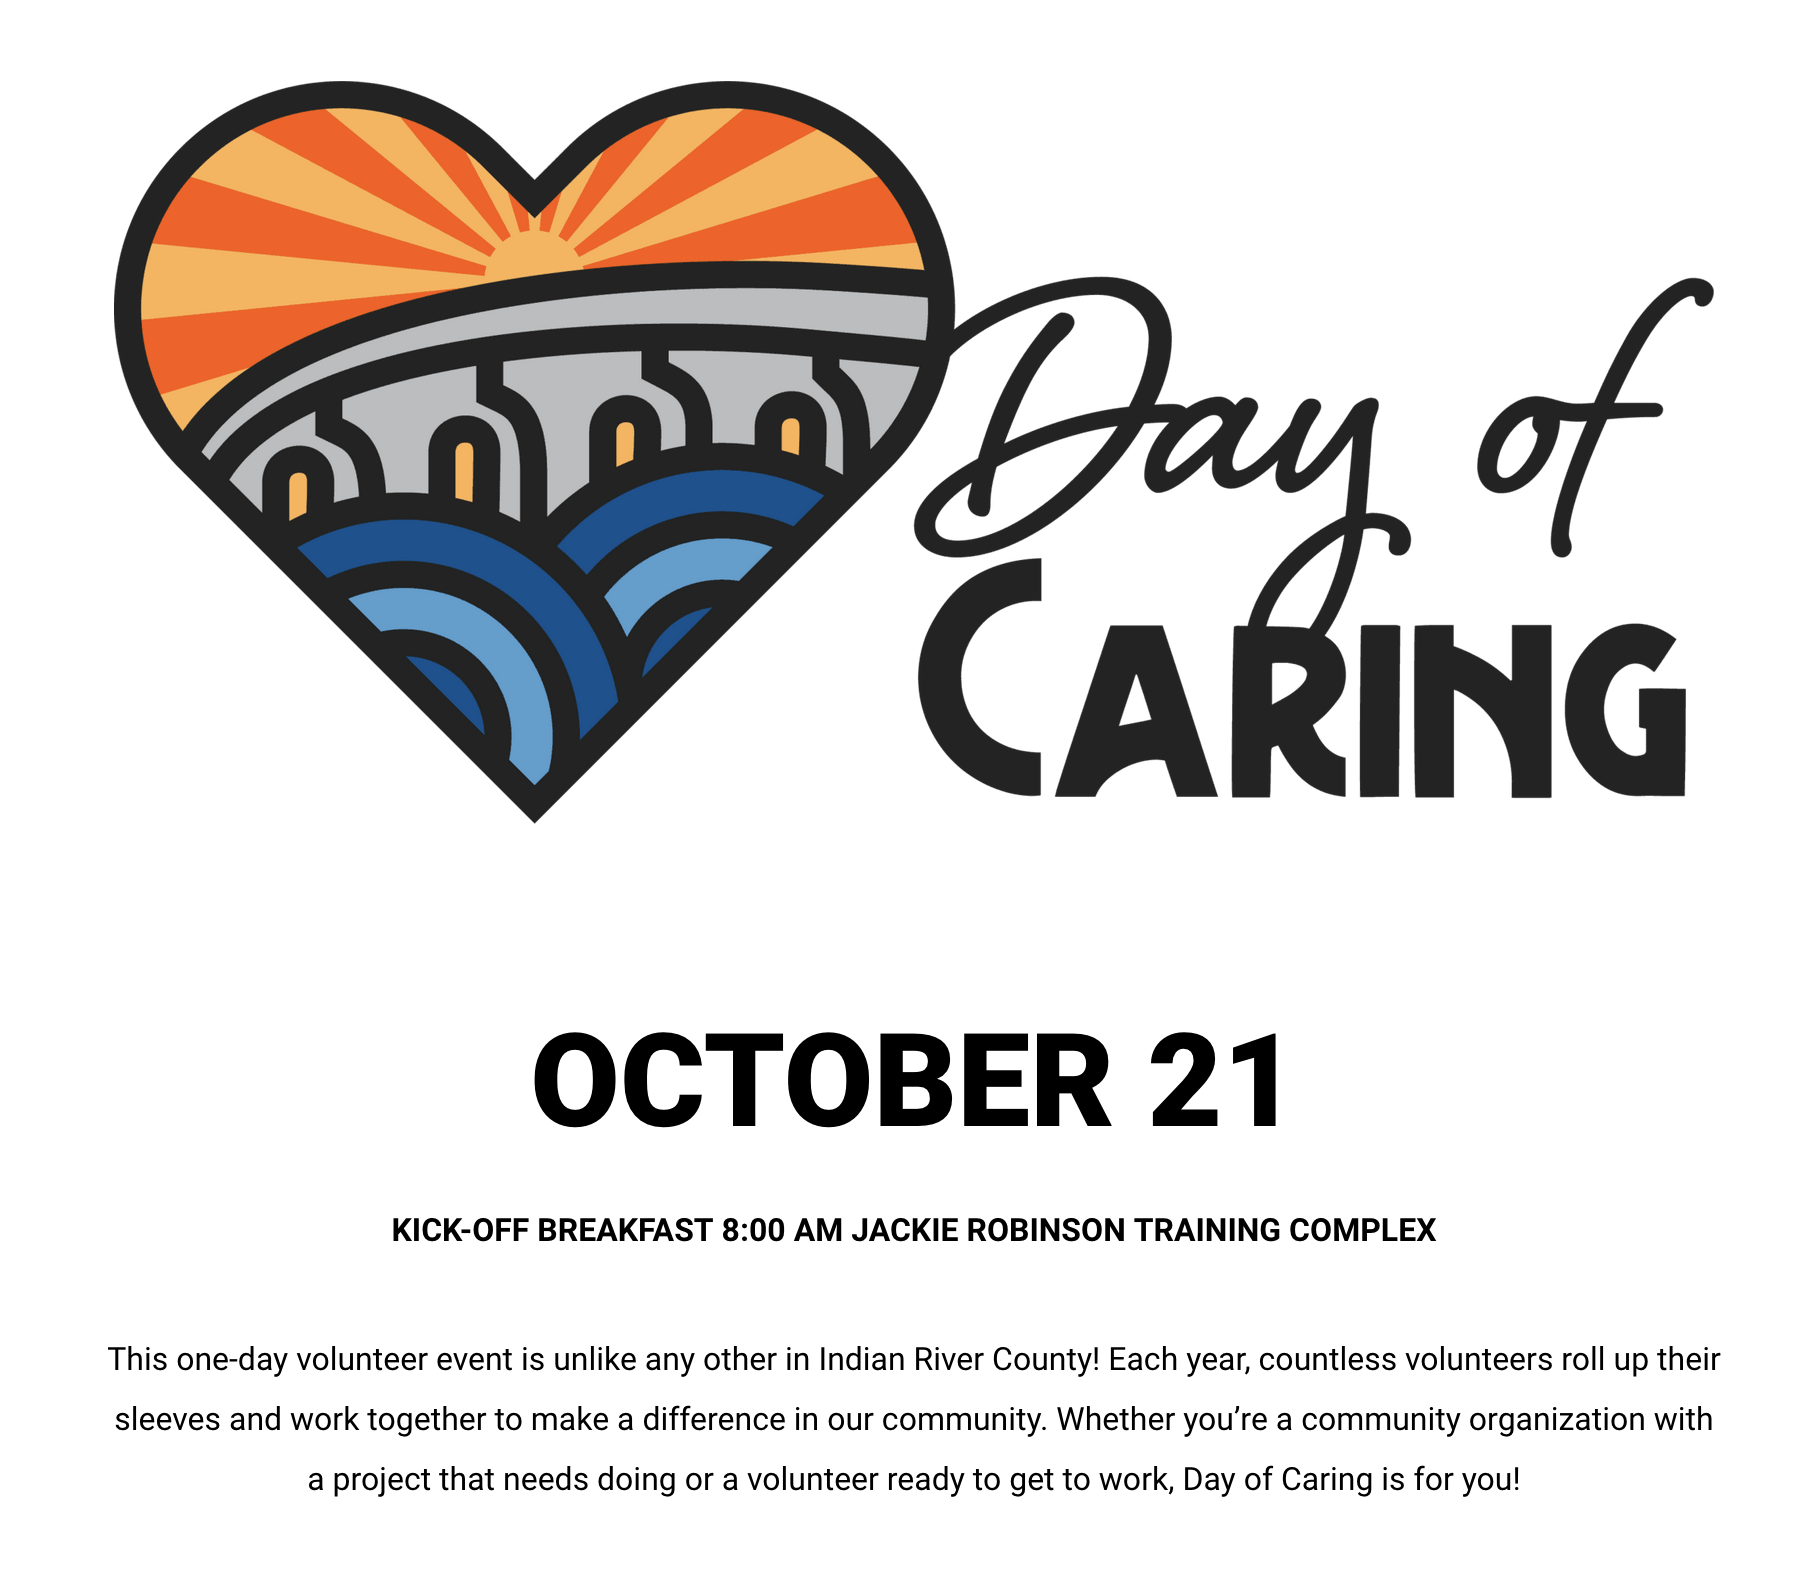 The logo for the Day of Caring event. The event begins October 21st, 2023, at 8am in the Jackie Robinson Training Complex. The flyer reads 